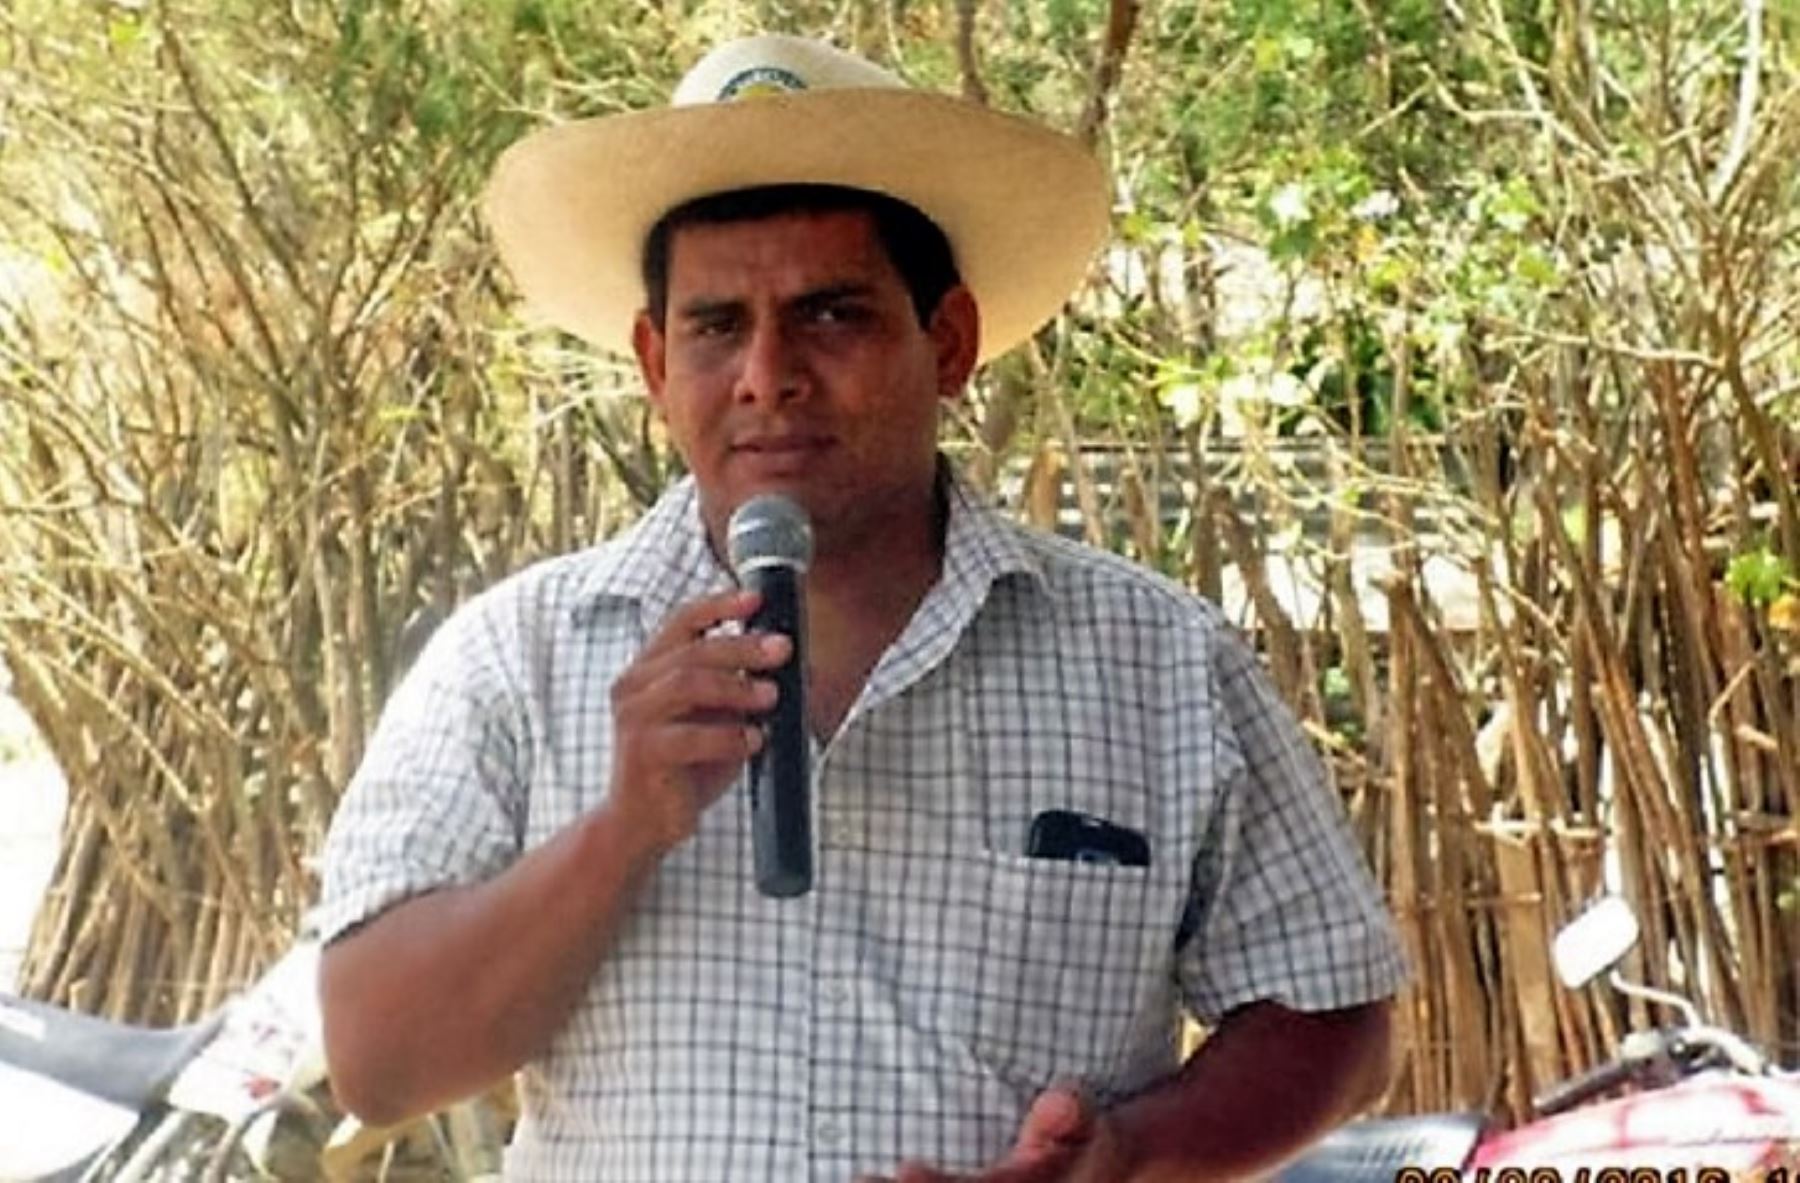 District mayor assassinated outside city hall in northern Peru